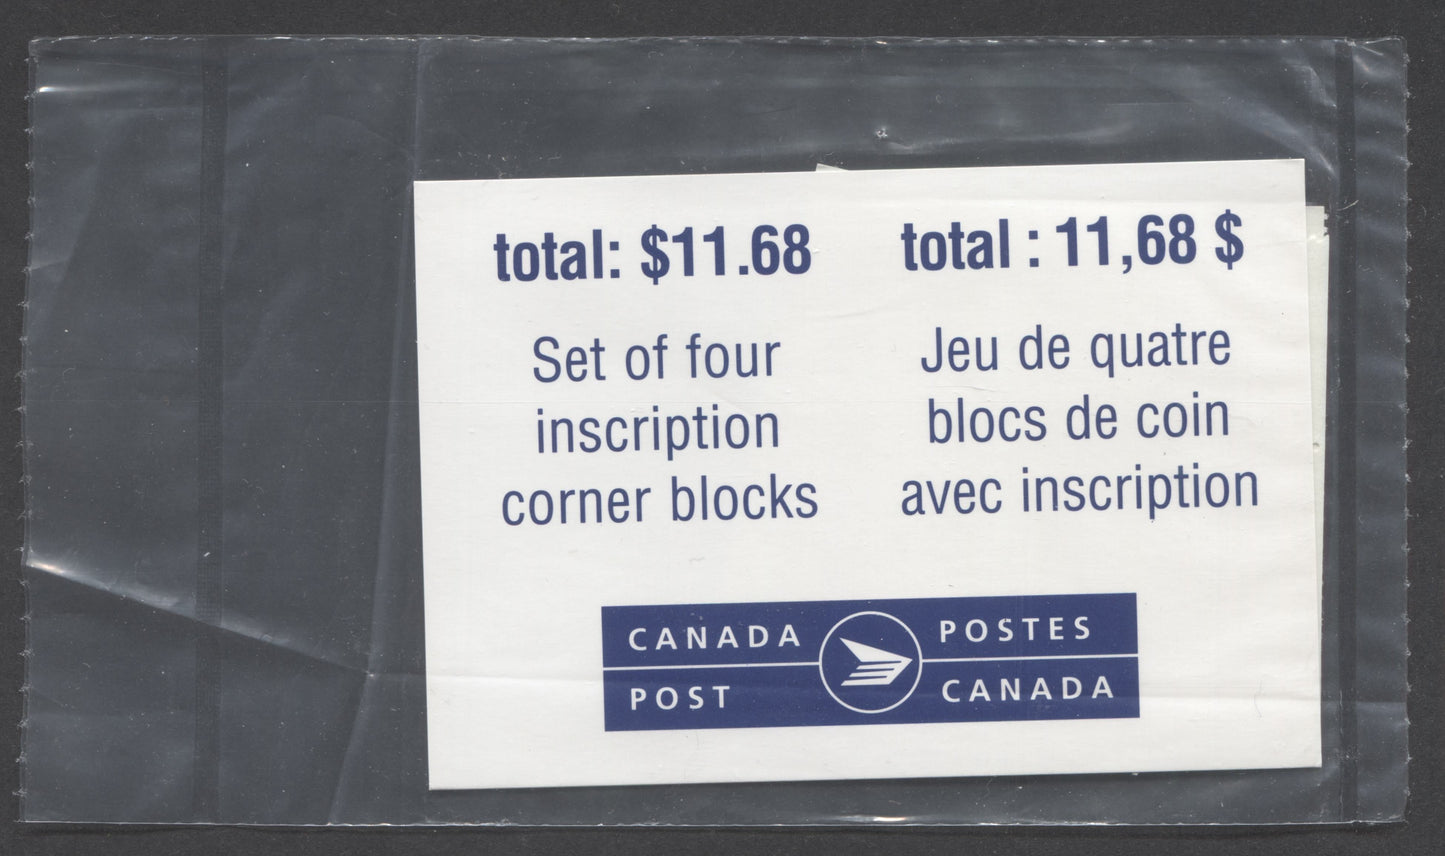 Lot 84 Canada #1685 73c Multicoloured 1998 Medium Value Stylized Maple Leaf Issue, Canada Post Sealed Pack of Inscription Blocks, Ashton Potter Printing On NF/DF CPP Paper, With HF Type 7A Insert Card, VFNH, Unitrade Cat. $30